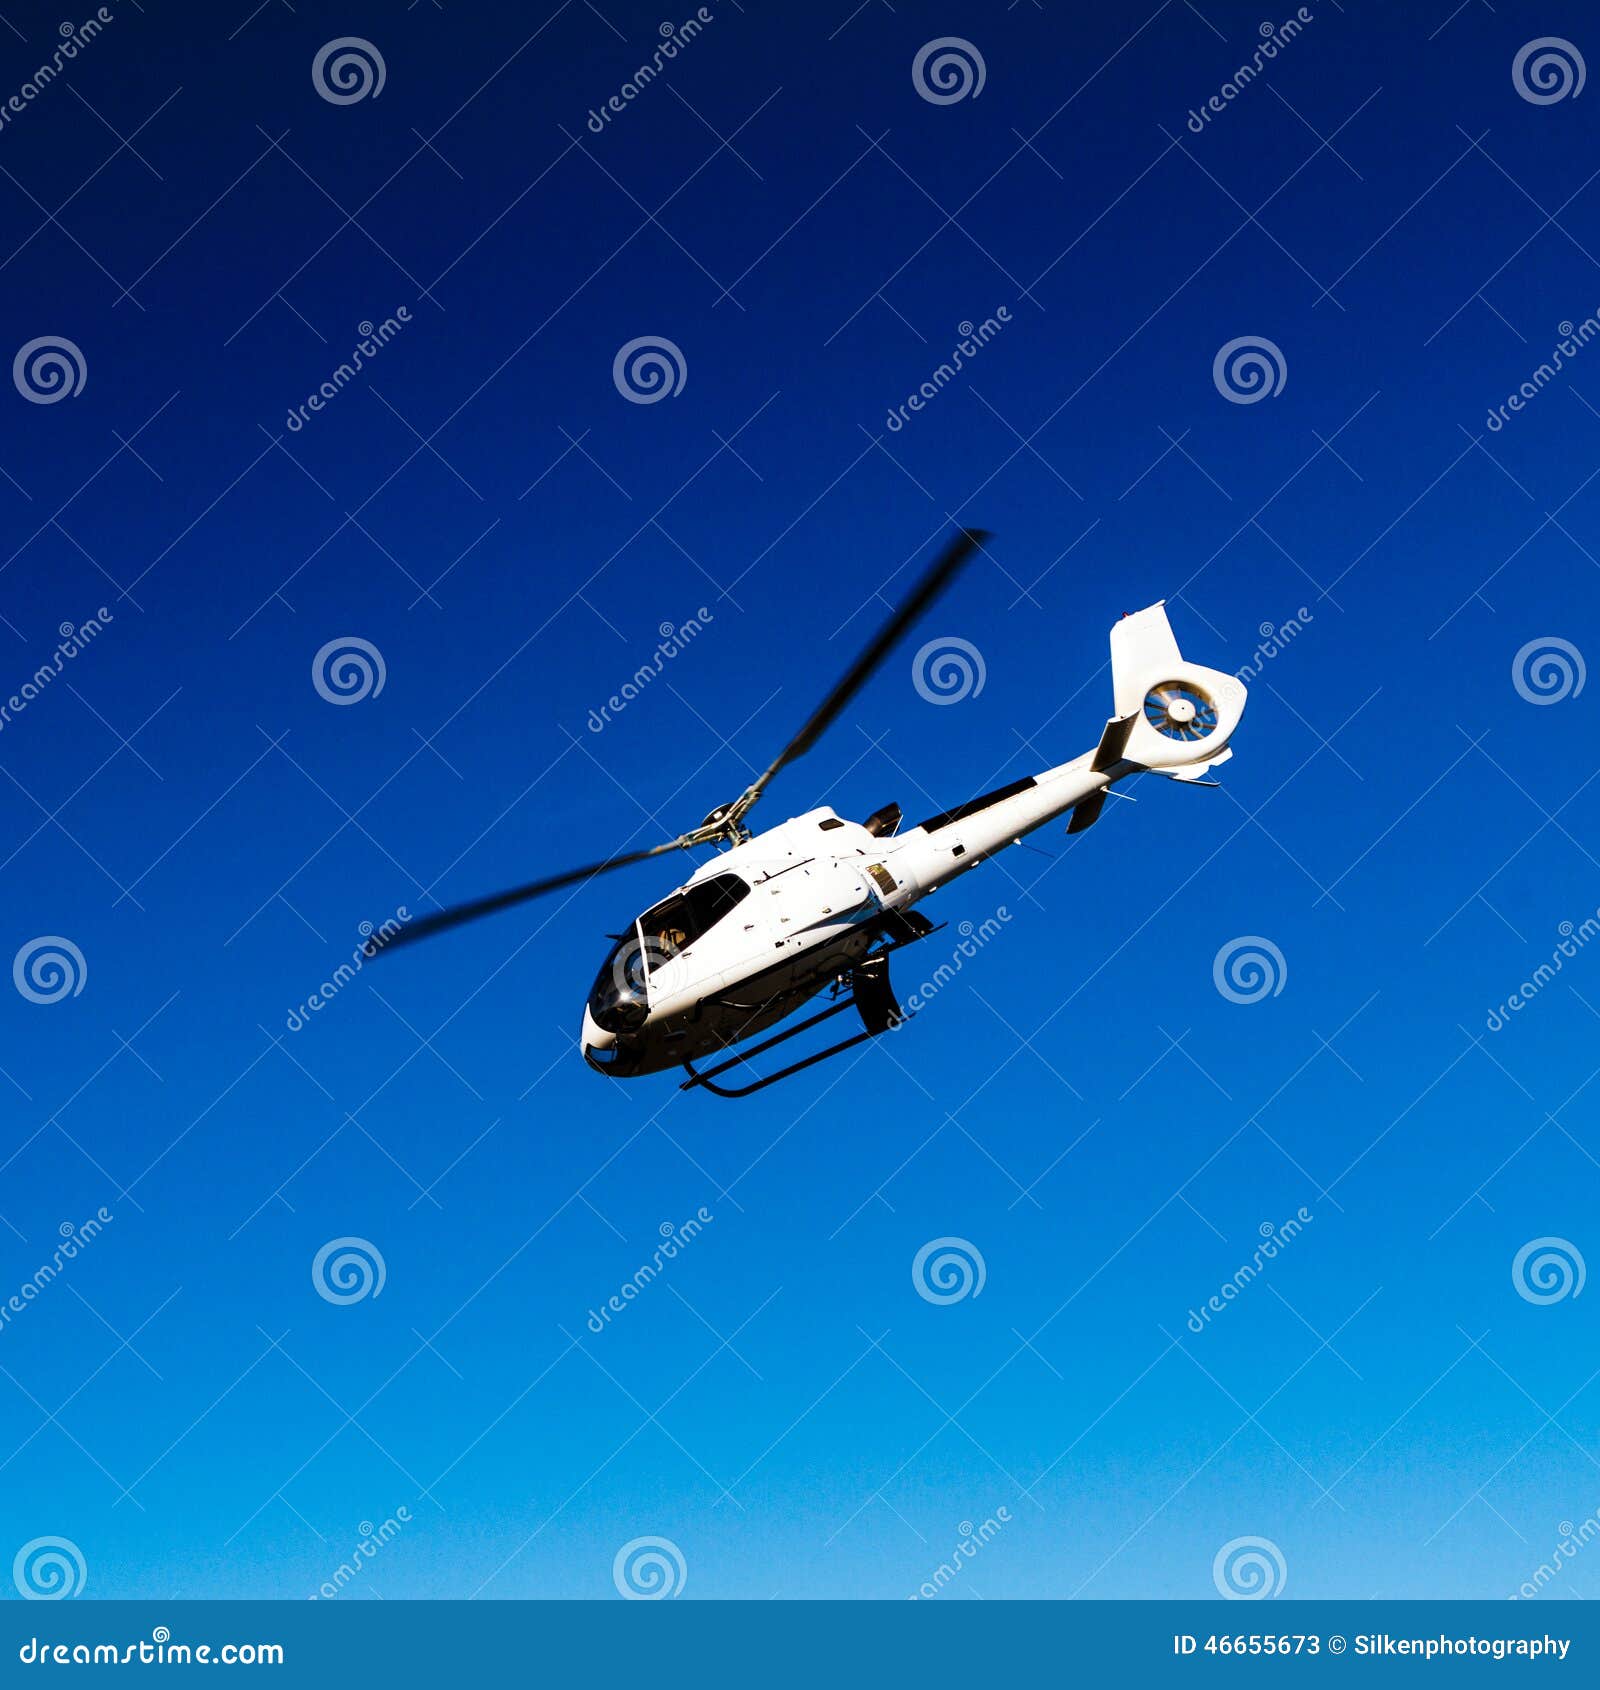 All 96+ Images blue and white helicopter flying low Excellent